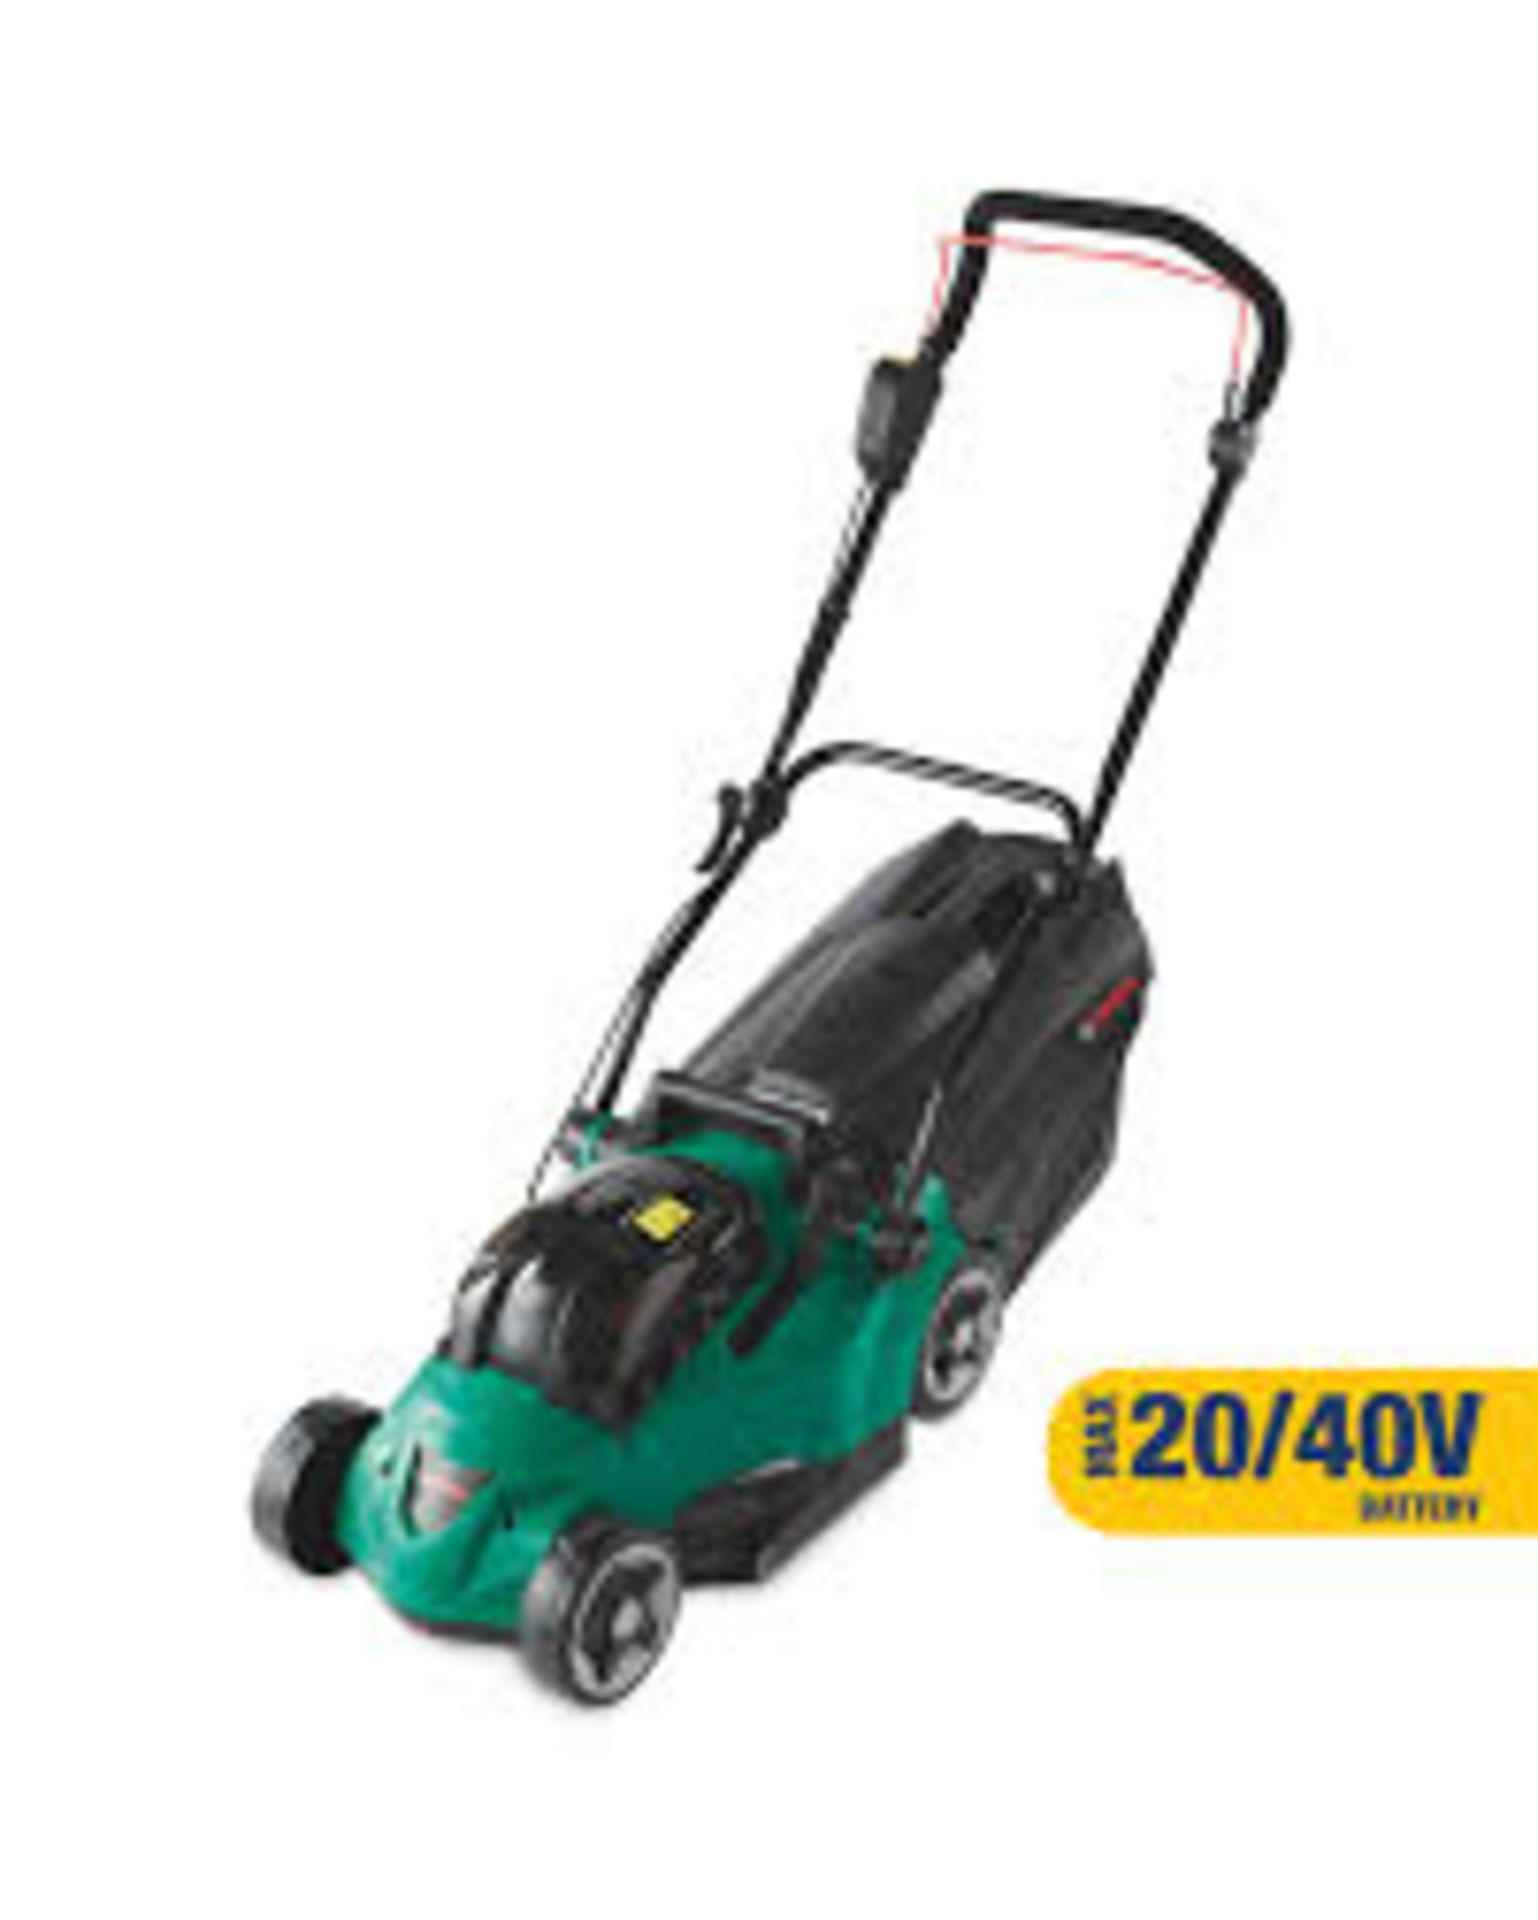 Boxed Ferrex 40V Lithium Cordless Lawn Mower RRP £80 (Public Viewing and Appraisals Available)